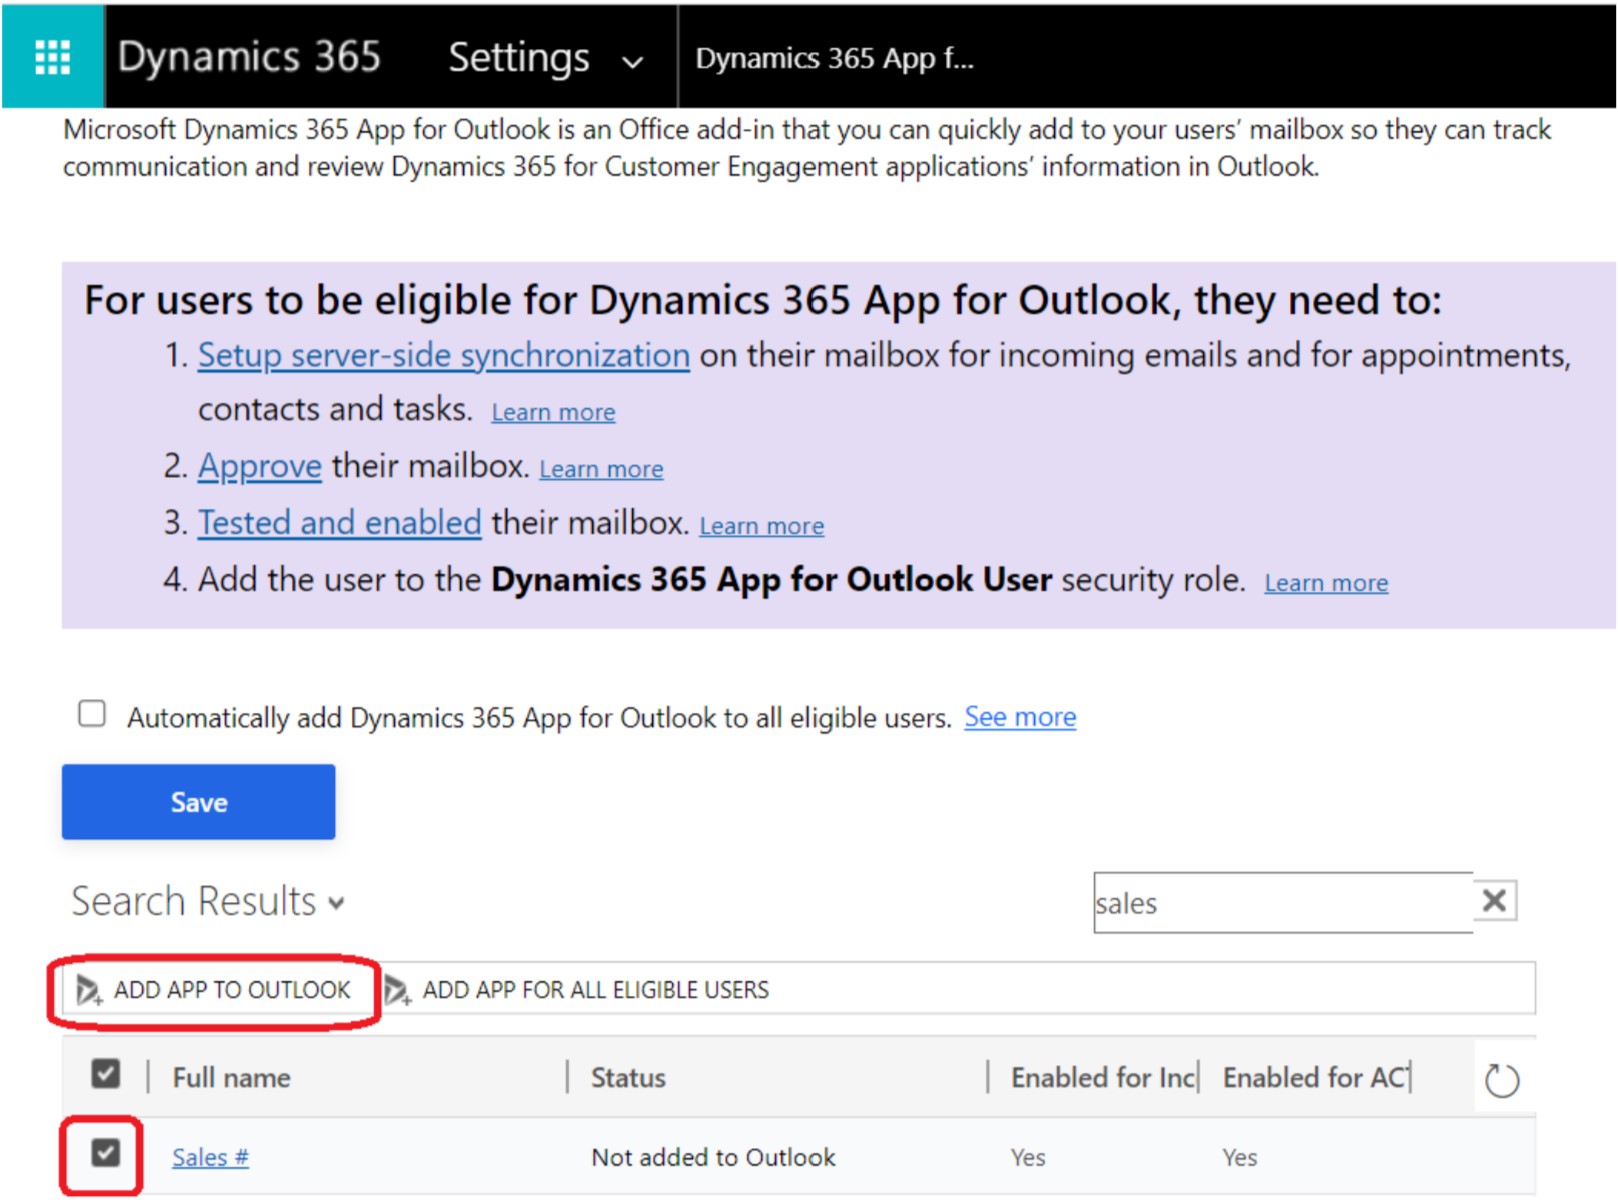 Screenshot showing how to add the Dynamics 365 App for Outlook for eligible users.